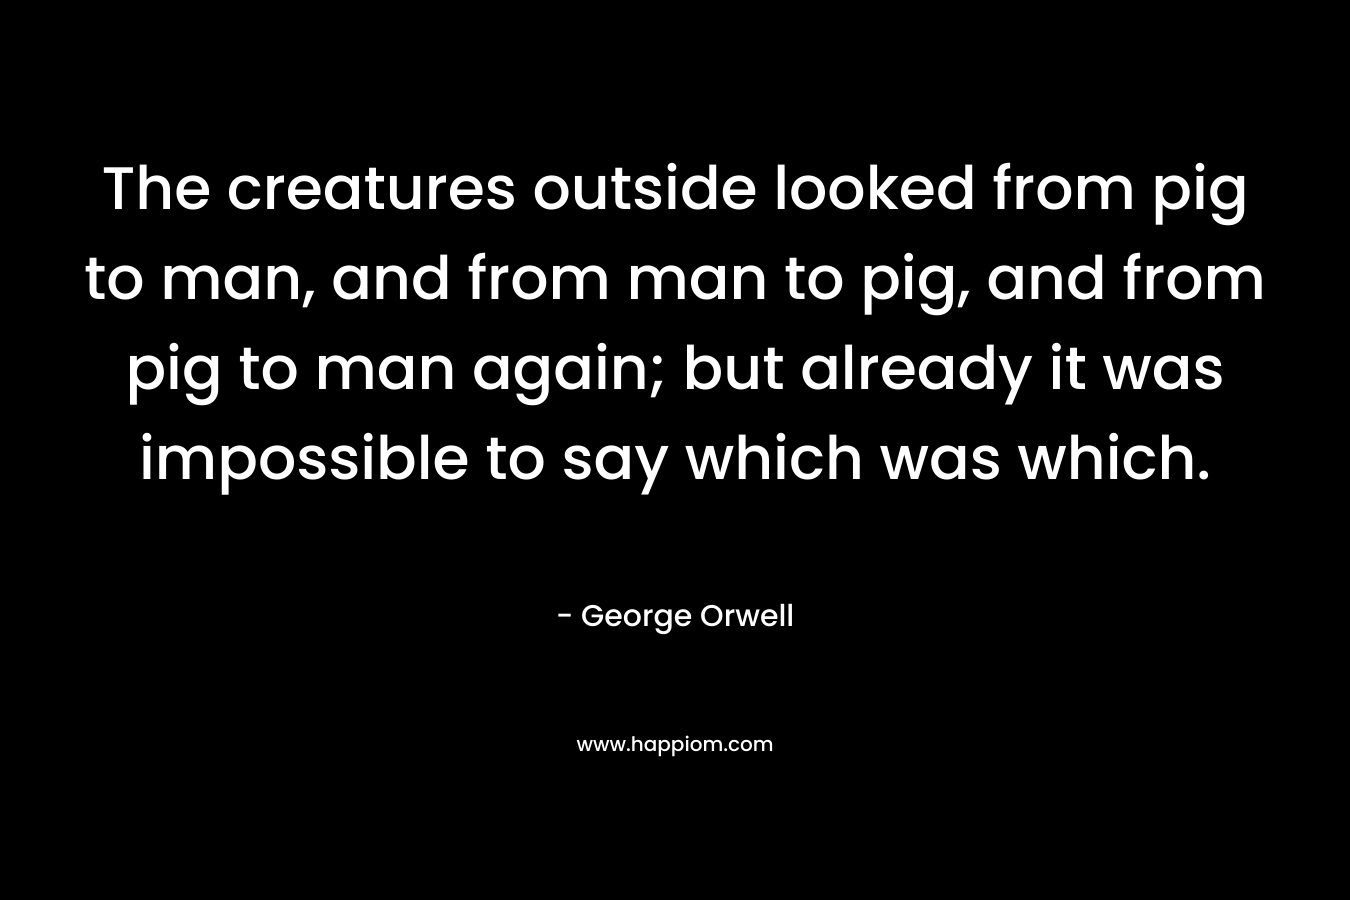 The creatures outside looked from pig to man, and from man to pig, and from pig to man again; but already it was impossible to say which was which.